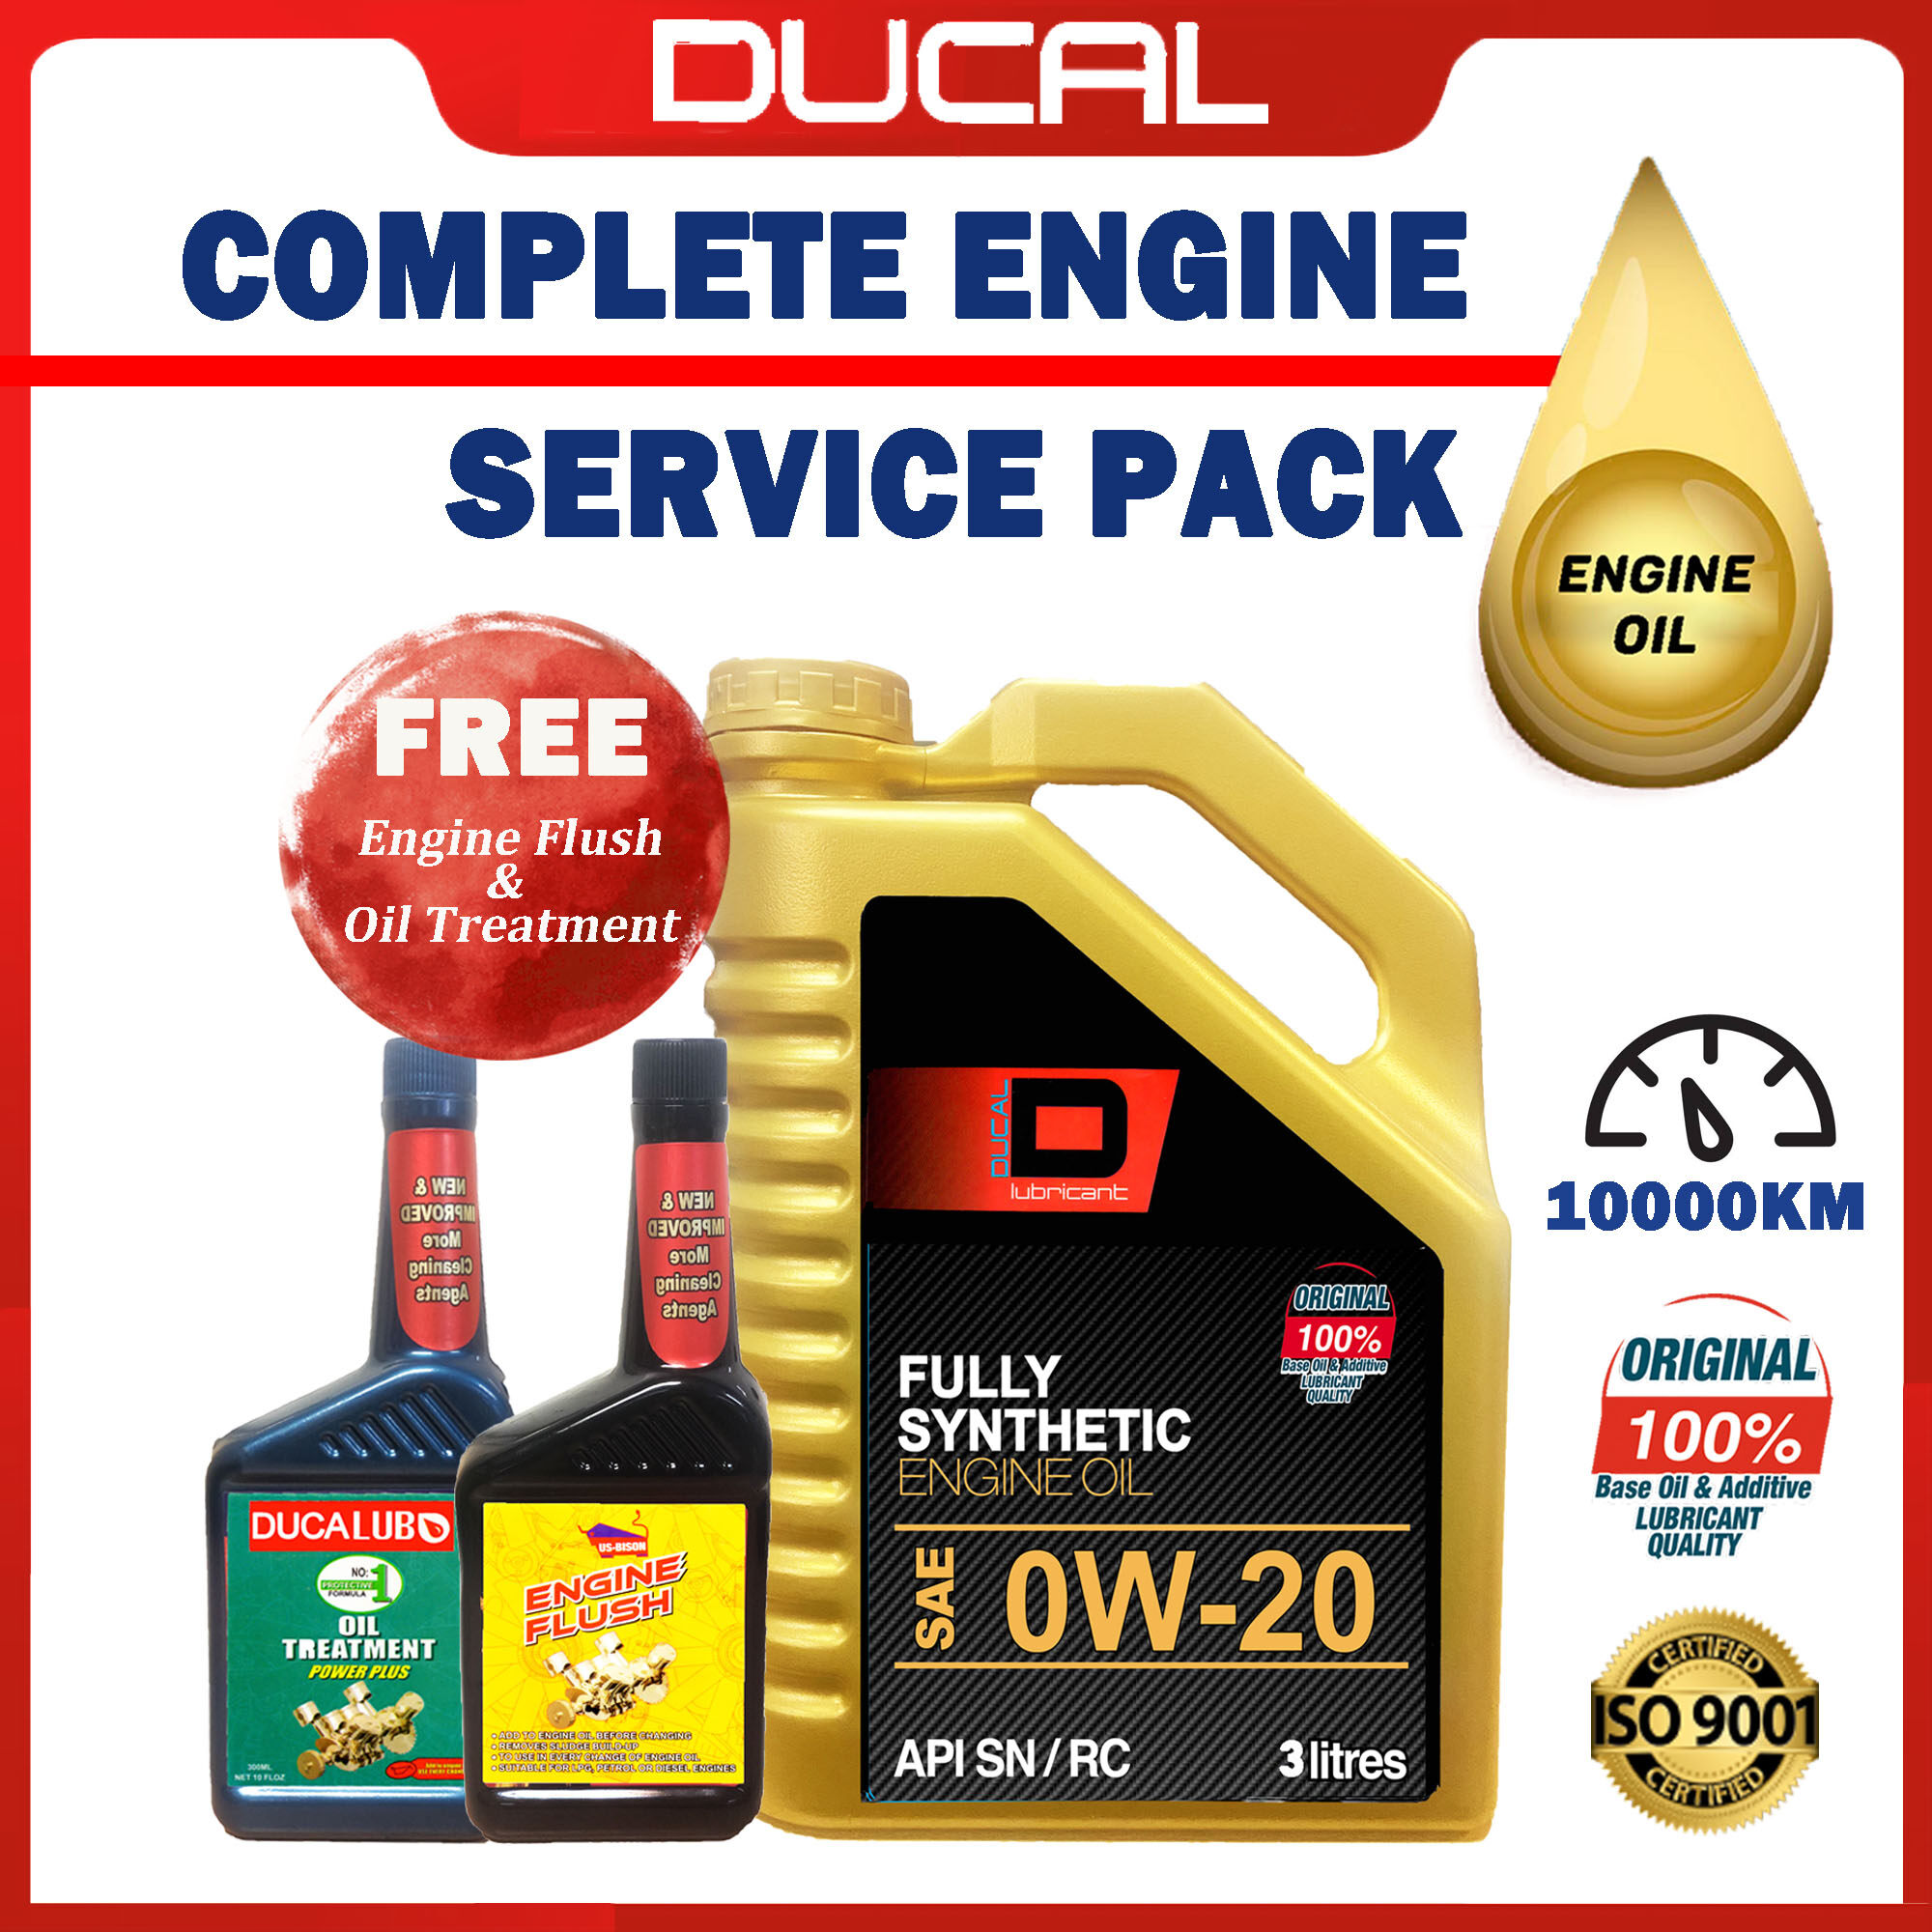 DUCAL FULLY SYNTHETIC Engine Oil SAE 0W20 SN/RC 3 Litres FREE 1 PREMIUM ENGINE FLUSH & 1 OIL TREATMENT & FREE MILEAGE STICKER ~ COMPLETE SERVICE PACKAGE 0W20 3L MINYAK HITAM MINYAK ENJIN